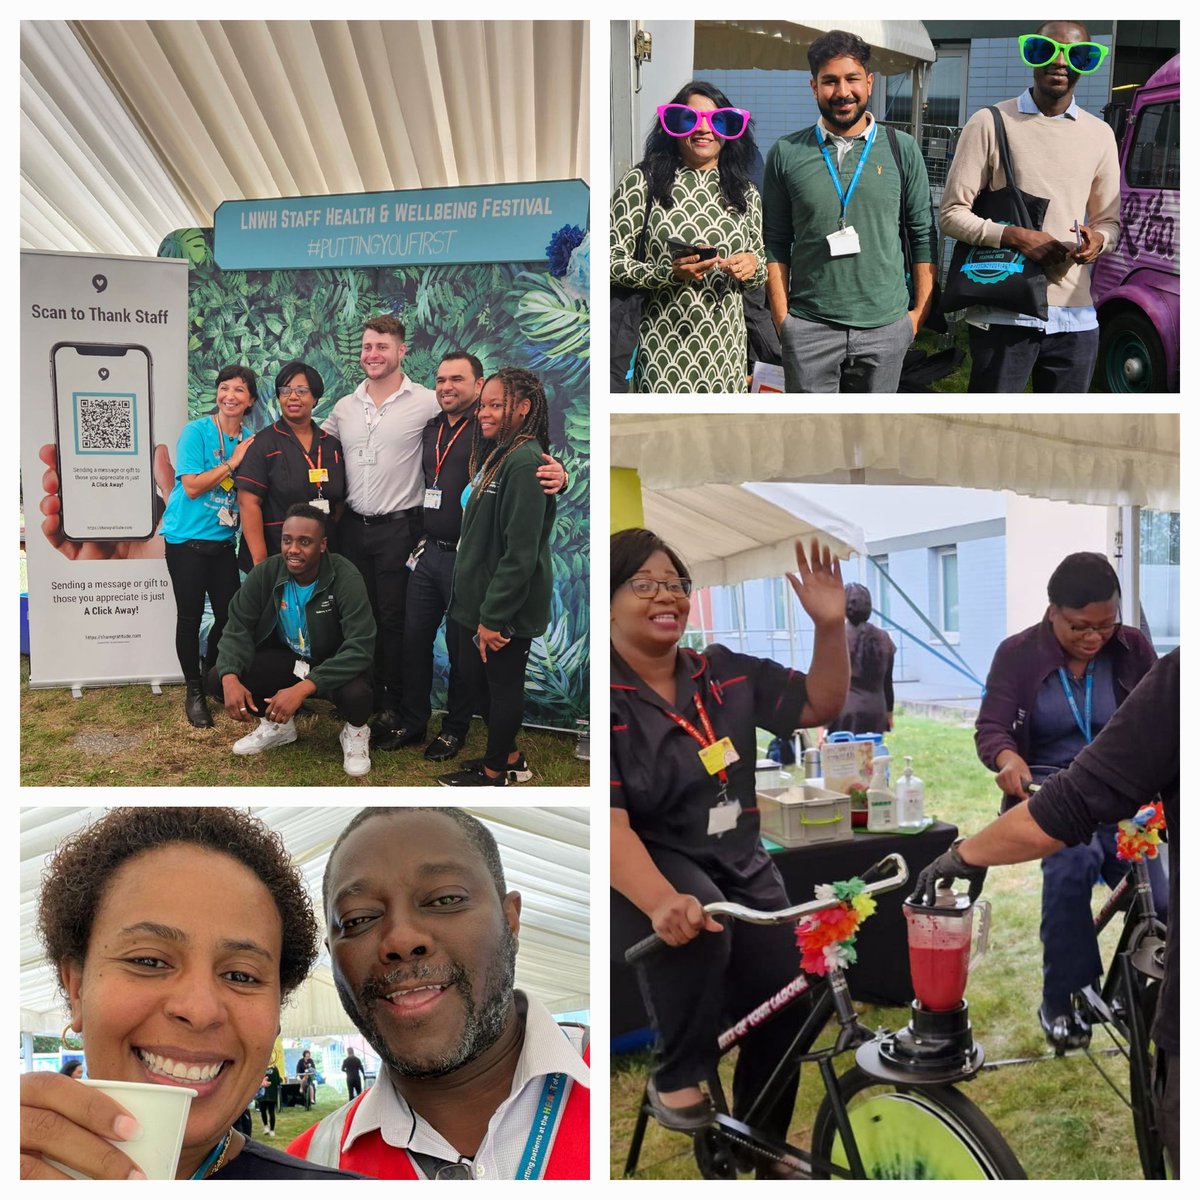 Fantastic LNWUH staff health and well-being festival yesterday. Really positive feedback from staff at Central Middlesex Hospital... Thank you @LNWH_wellbeing team. The smoothie making bike was the highlight ✨️ @LNWH_NHS @lisa_klseahorse